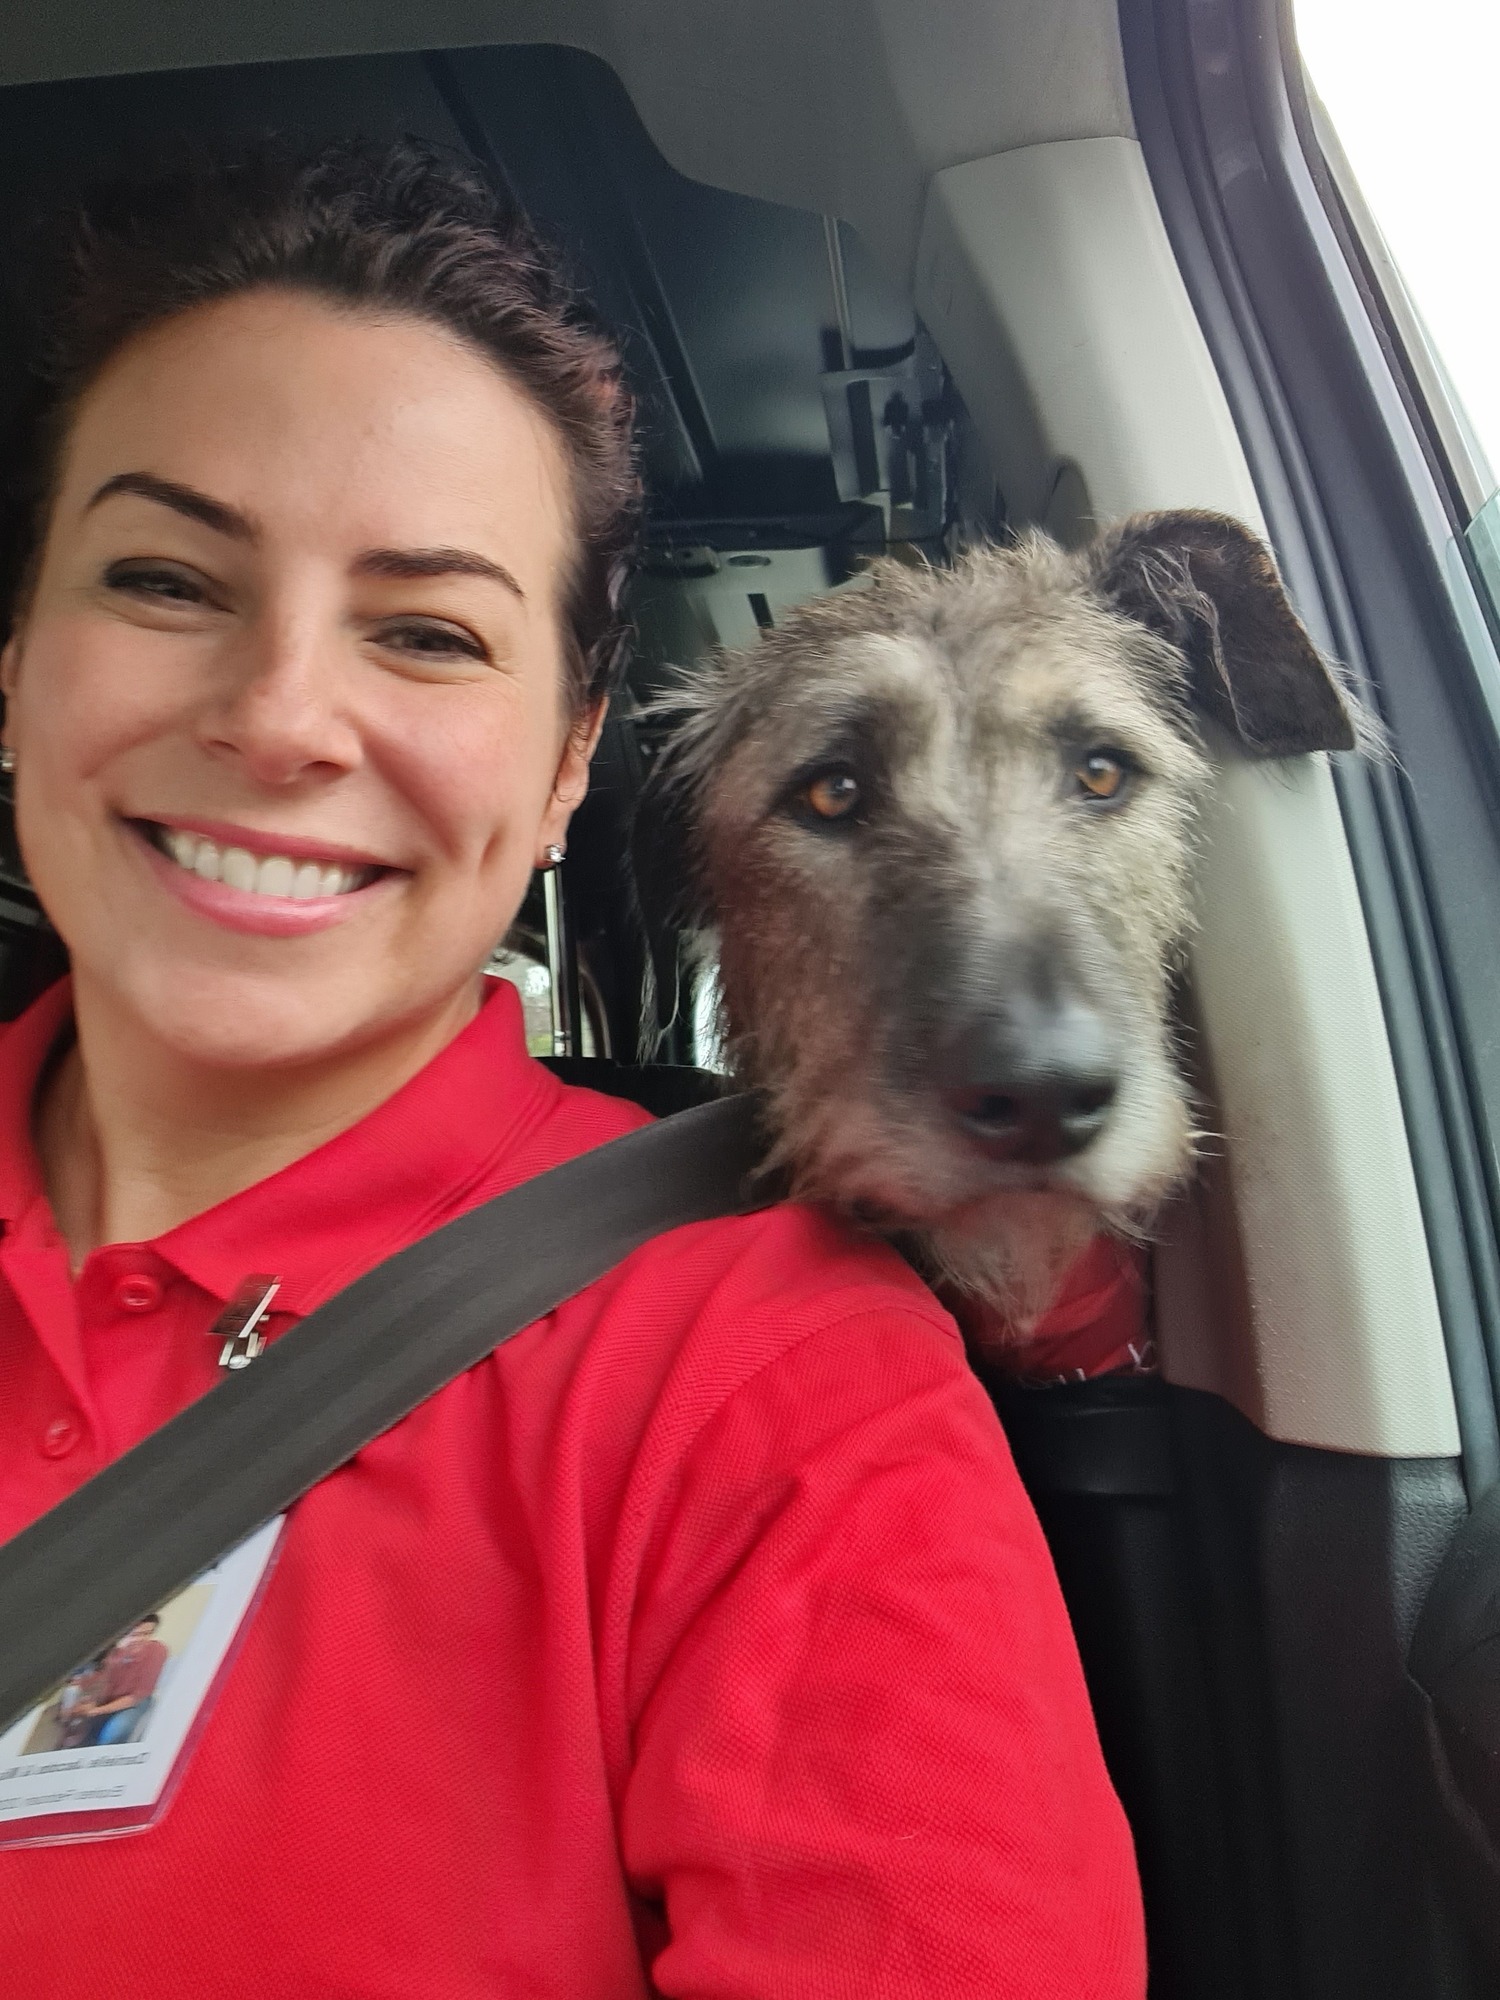 A smiling woman in a car with a shaggy big dog